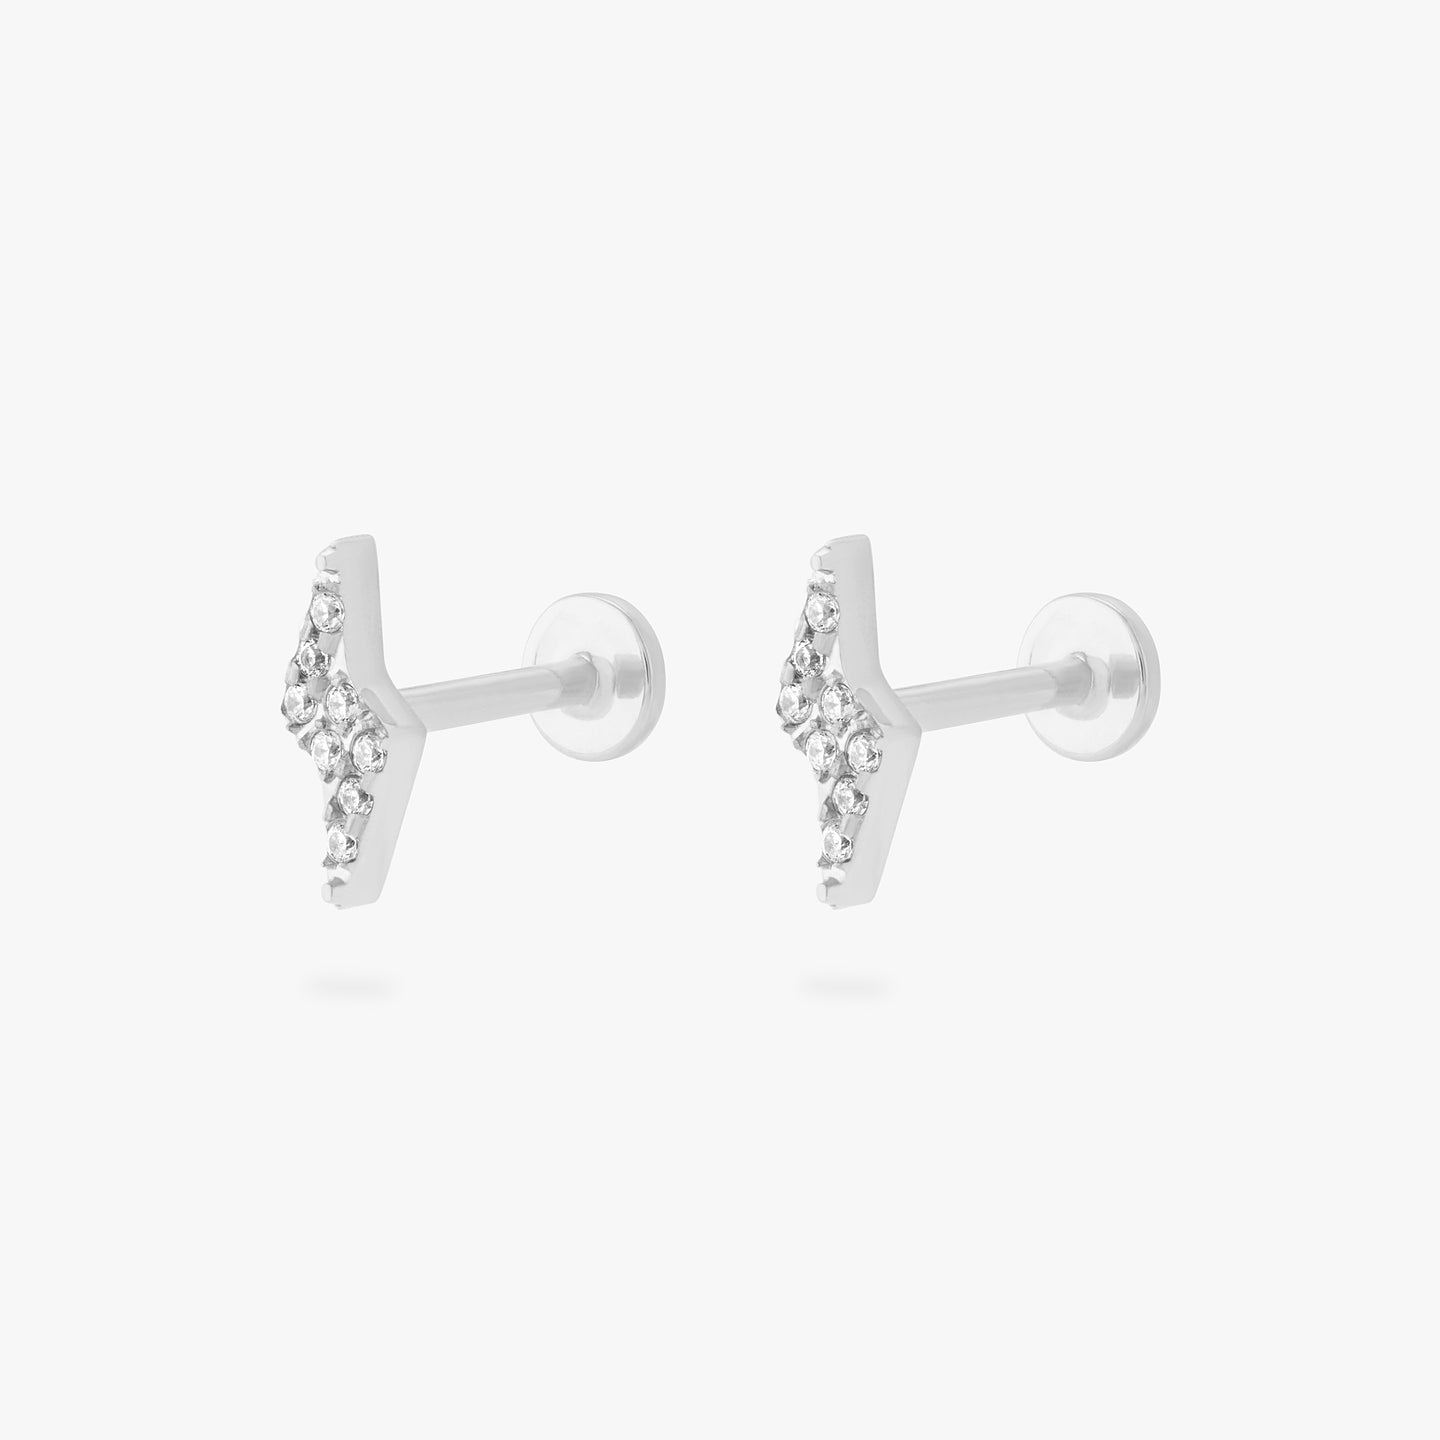 This is an image of a pair of silver/clear pave lightning-bolt shaped flatback tops with silver labrets with circle discs that have an 